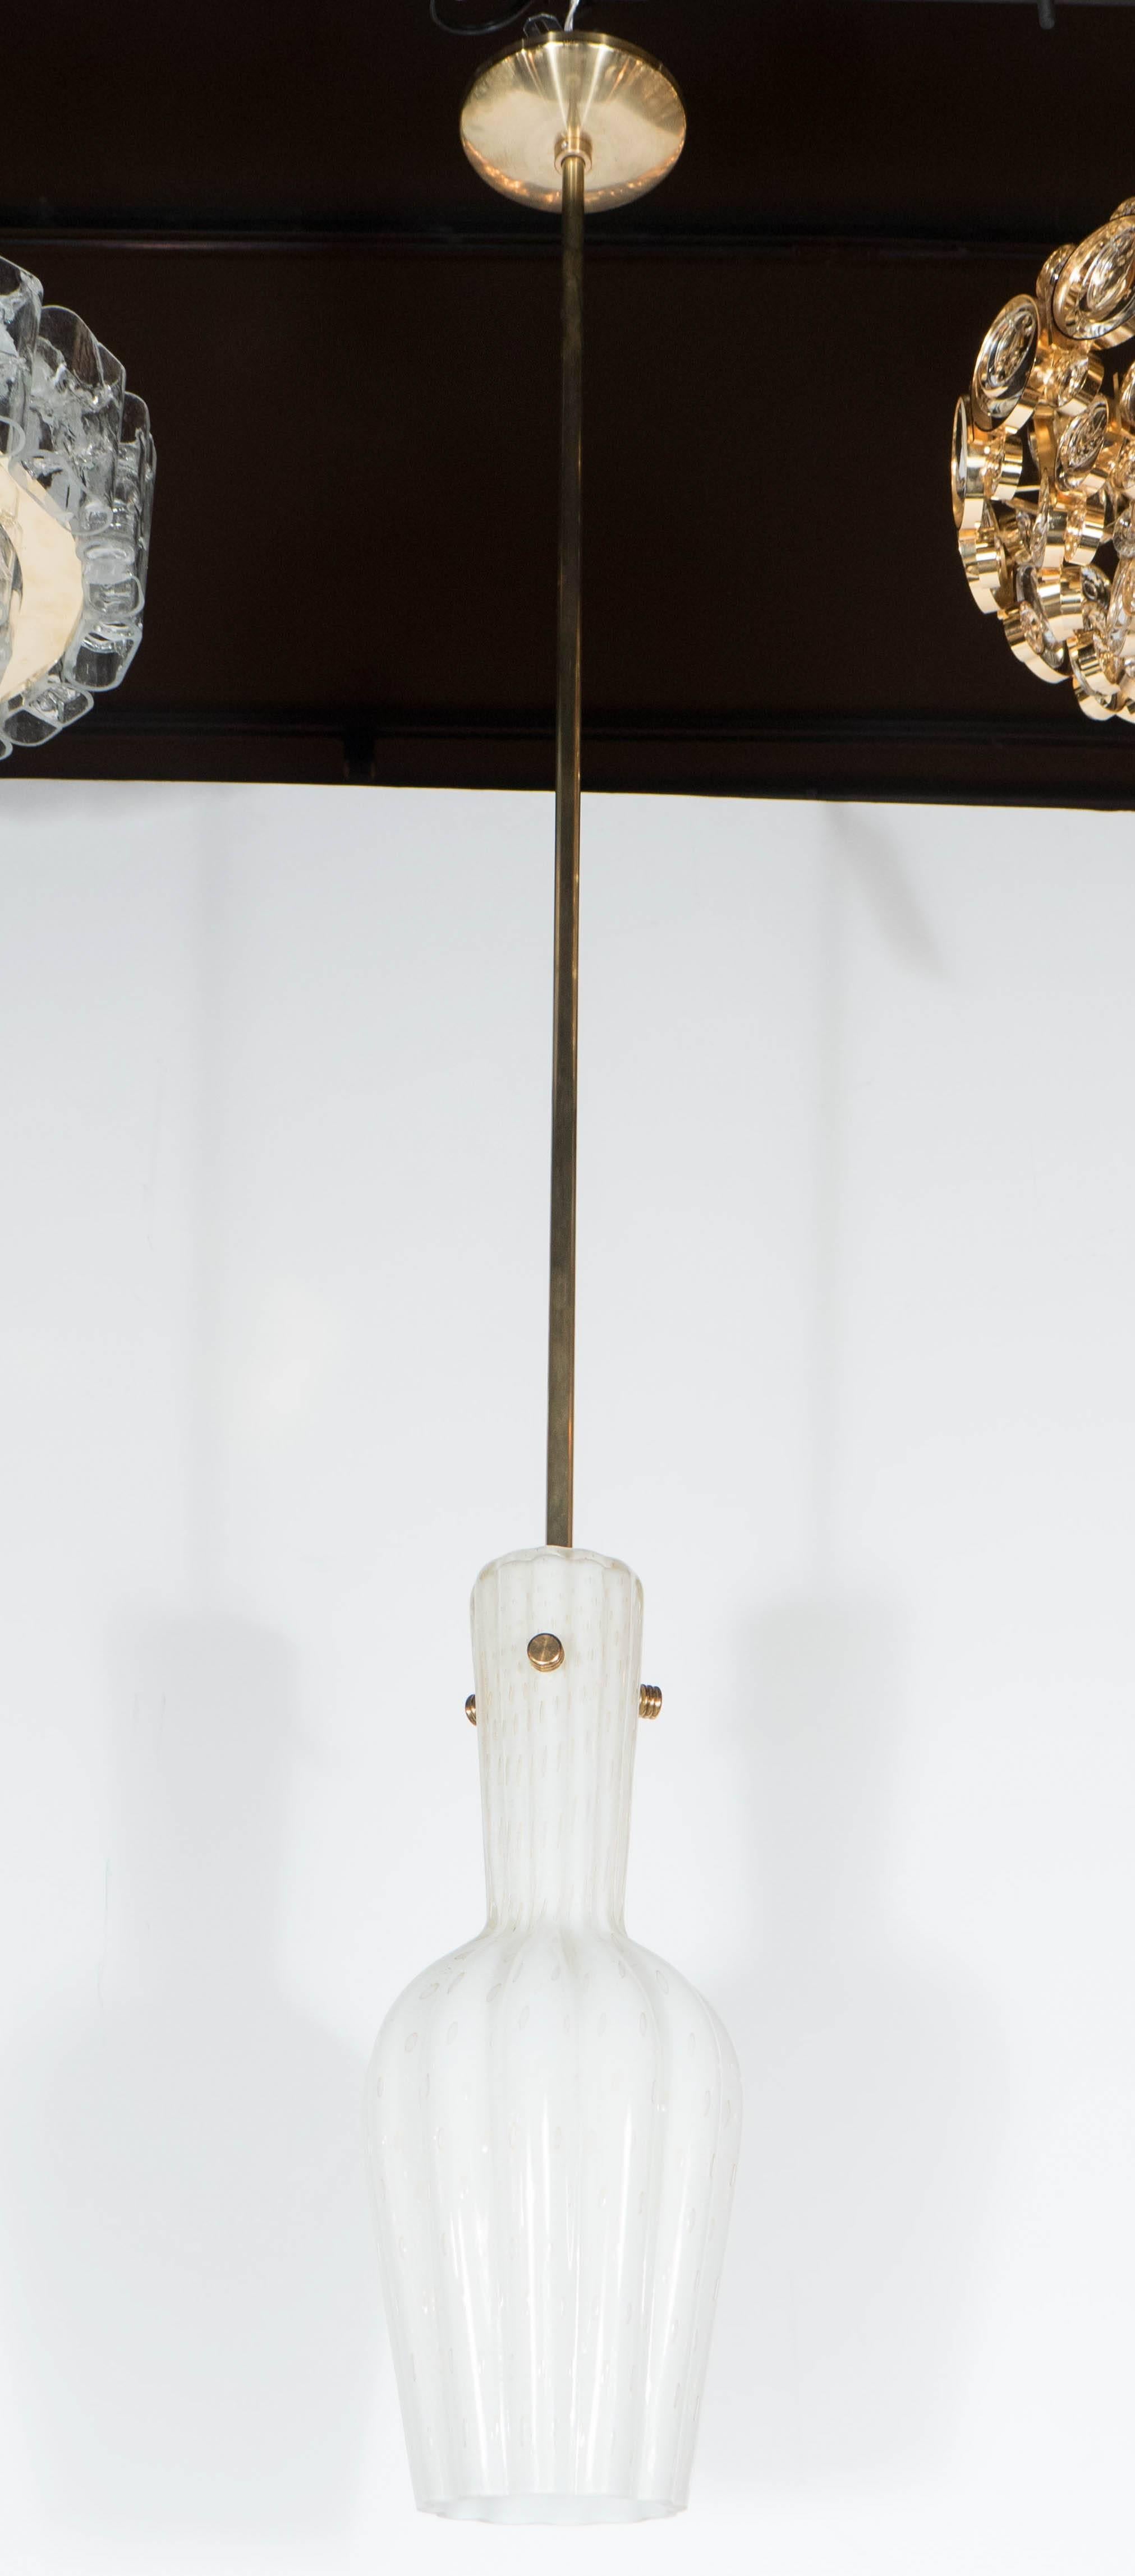 This stunning pair of textured and layered white and clear glass pendants were realized in the manner of Avem in Italy circa 1950. Murines with 24-Karat gold flecks adorn each pendant and are supported by antiqued brass fittings. With their clean